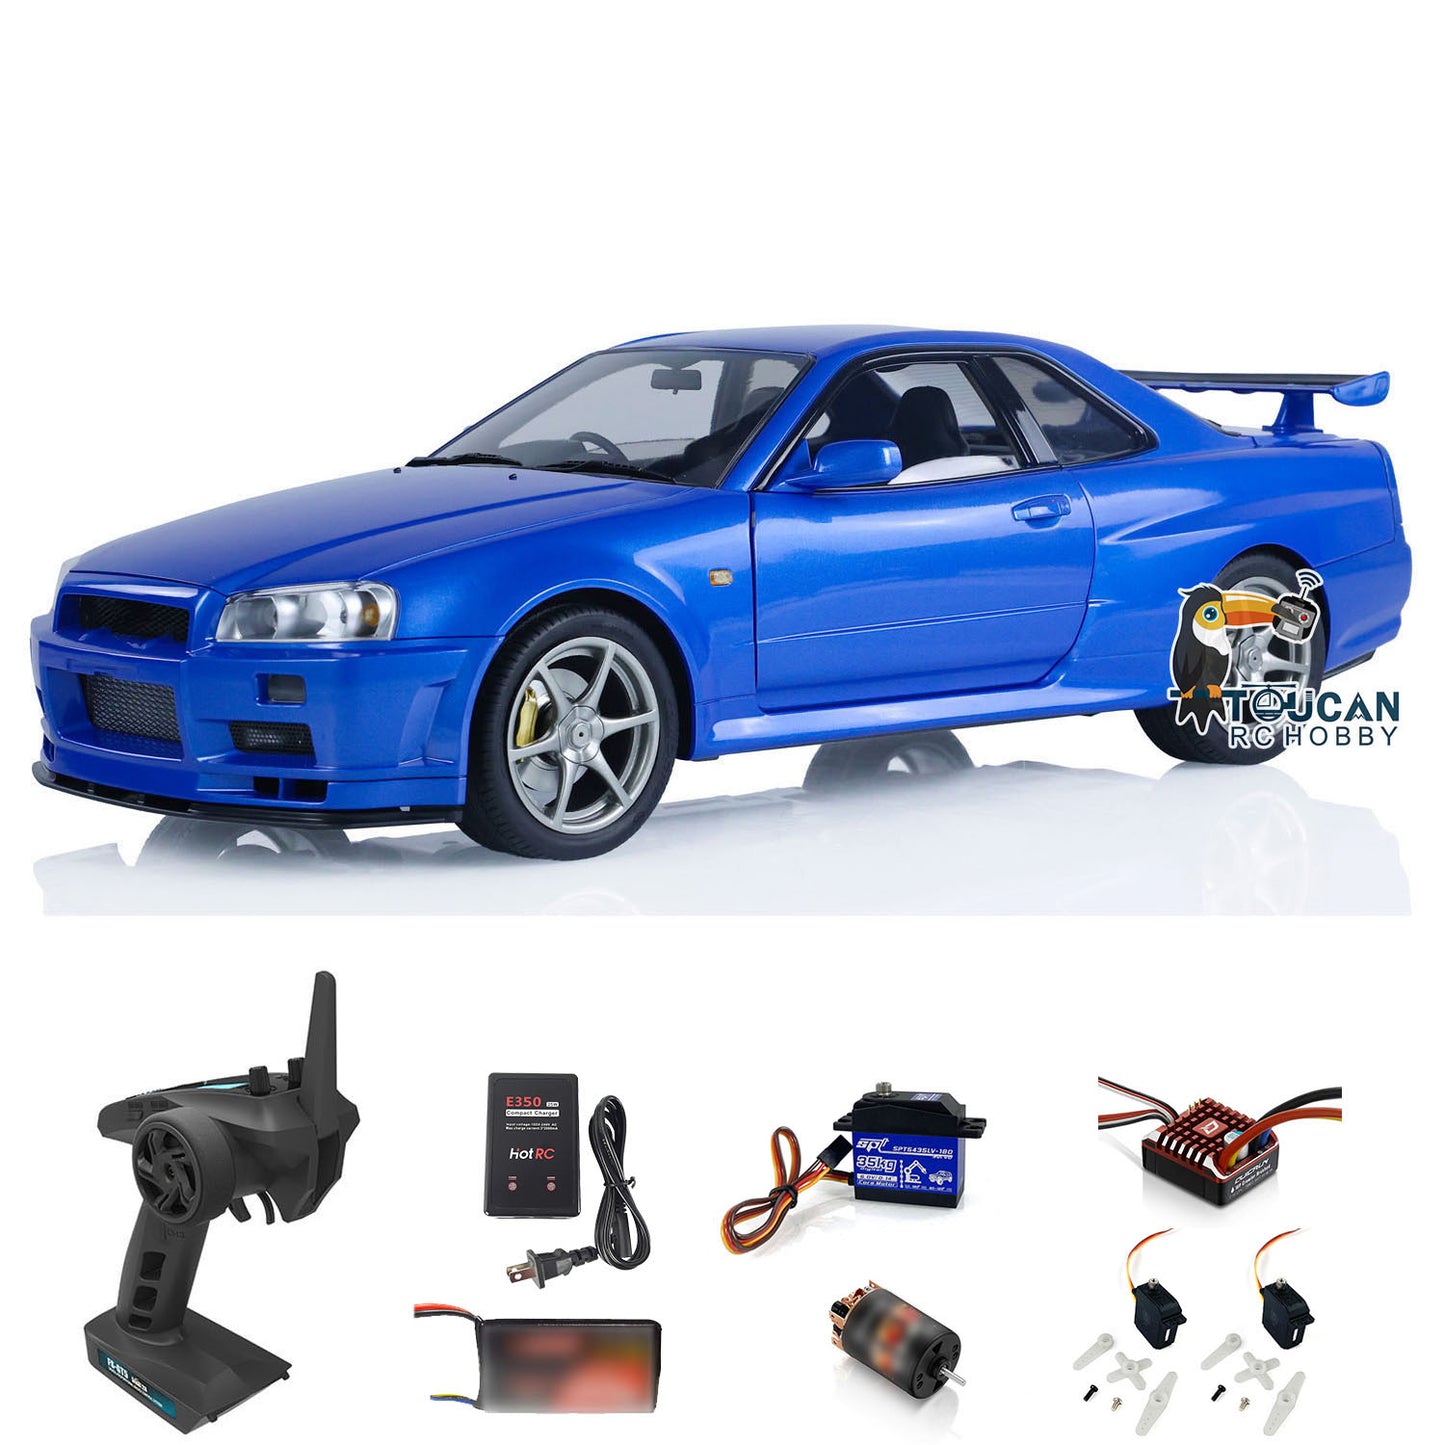 IN STOCK Capo 1/8 R34 RTR 4WD RC Drift Racing Car Metal Radio Controlled High-speed Vehicle Brushless Motor Painted Assembled Collection DIY Model